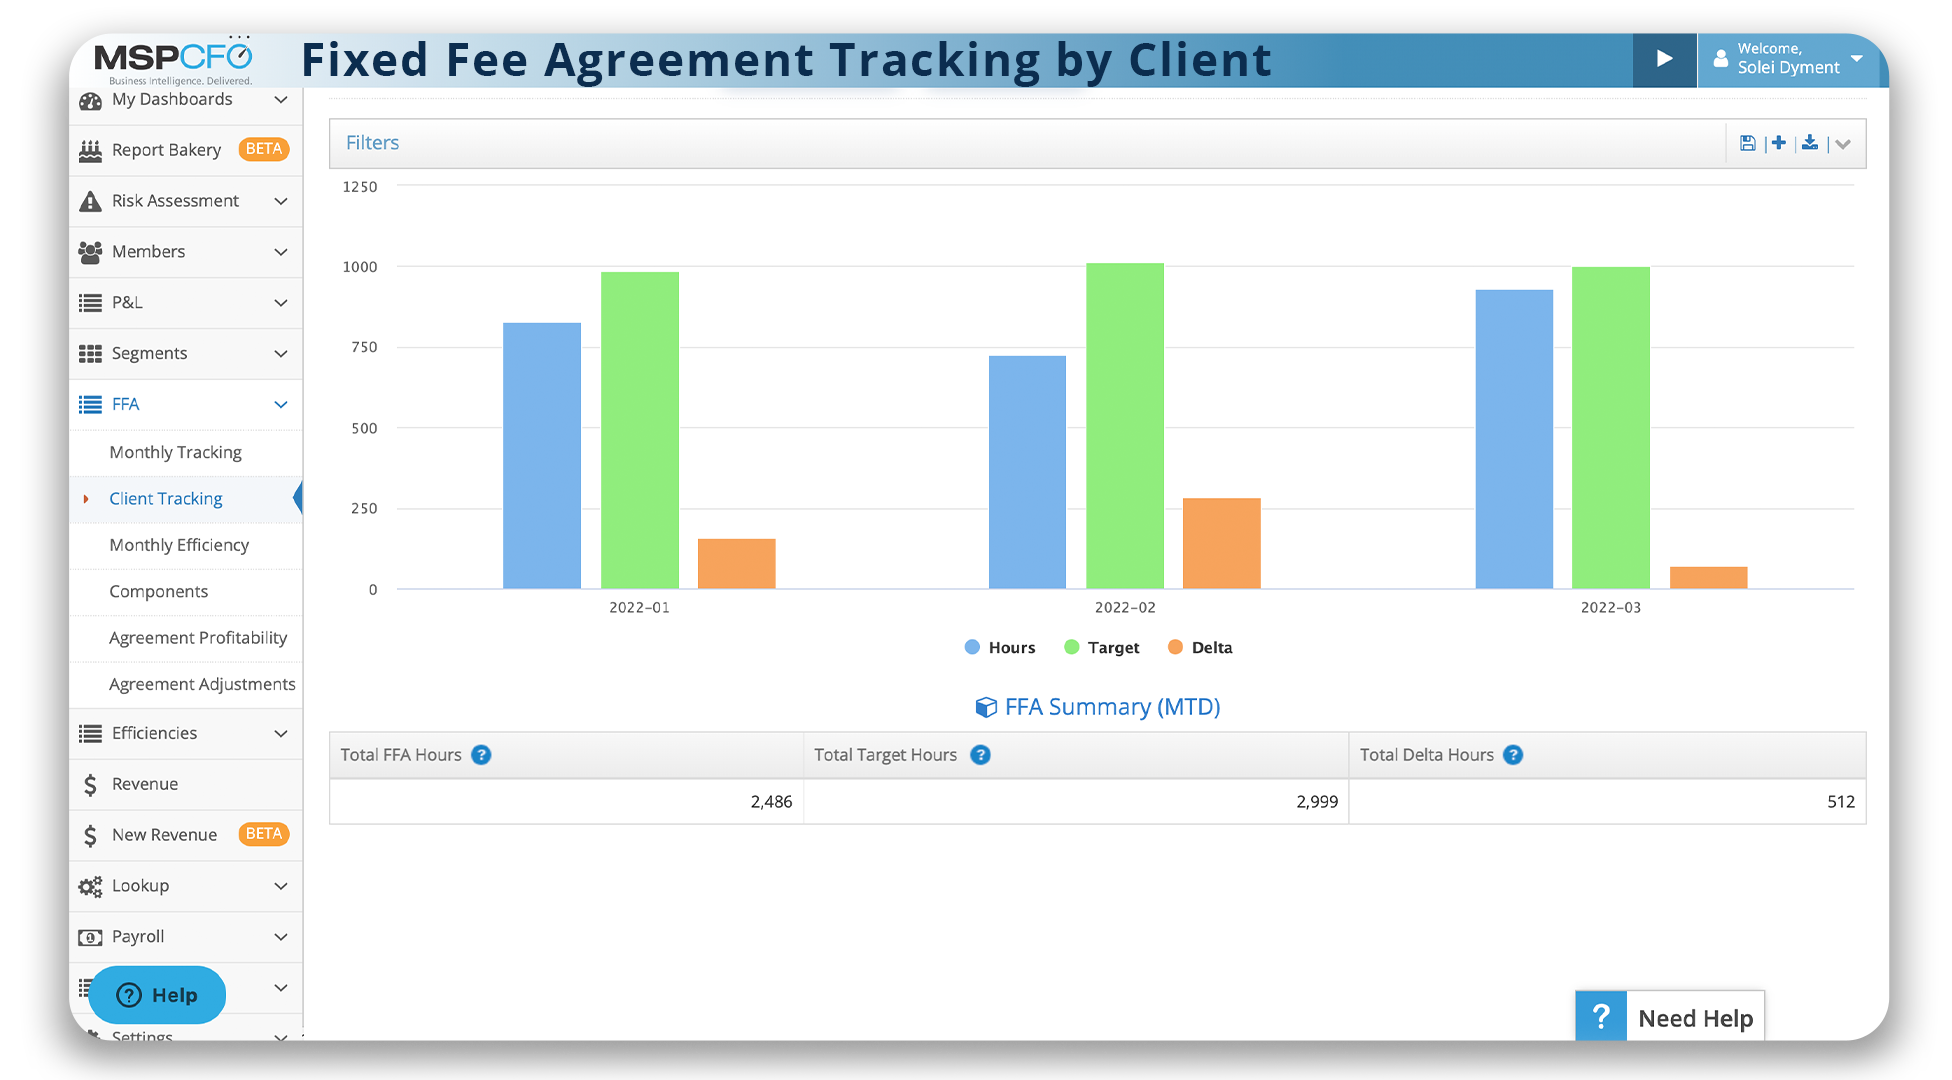 Fixed Fee Agreement Tracking by Client